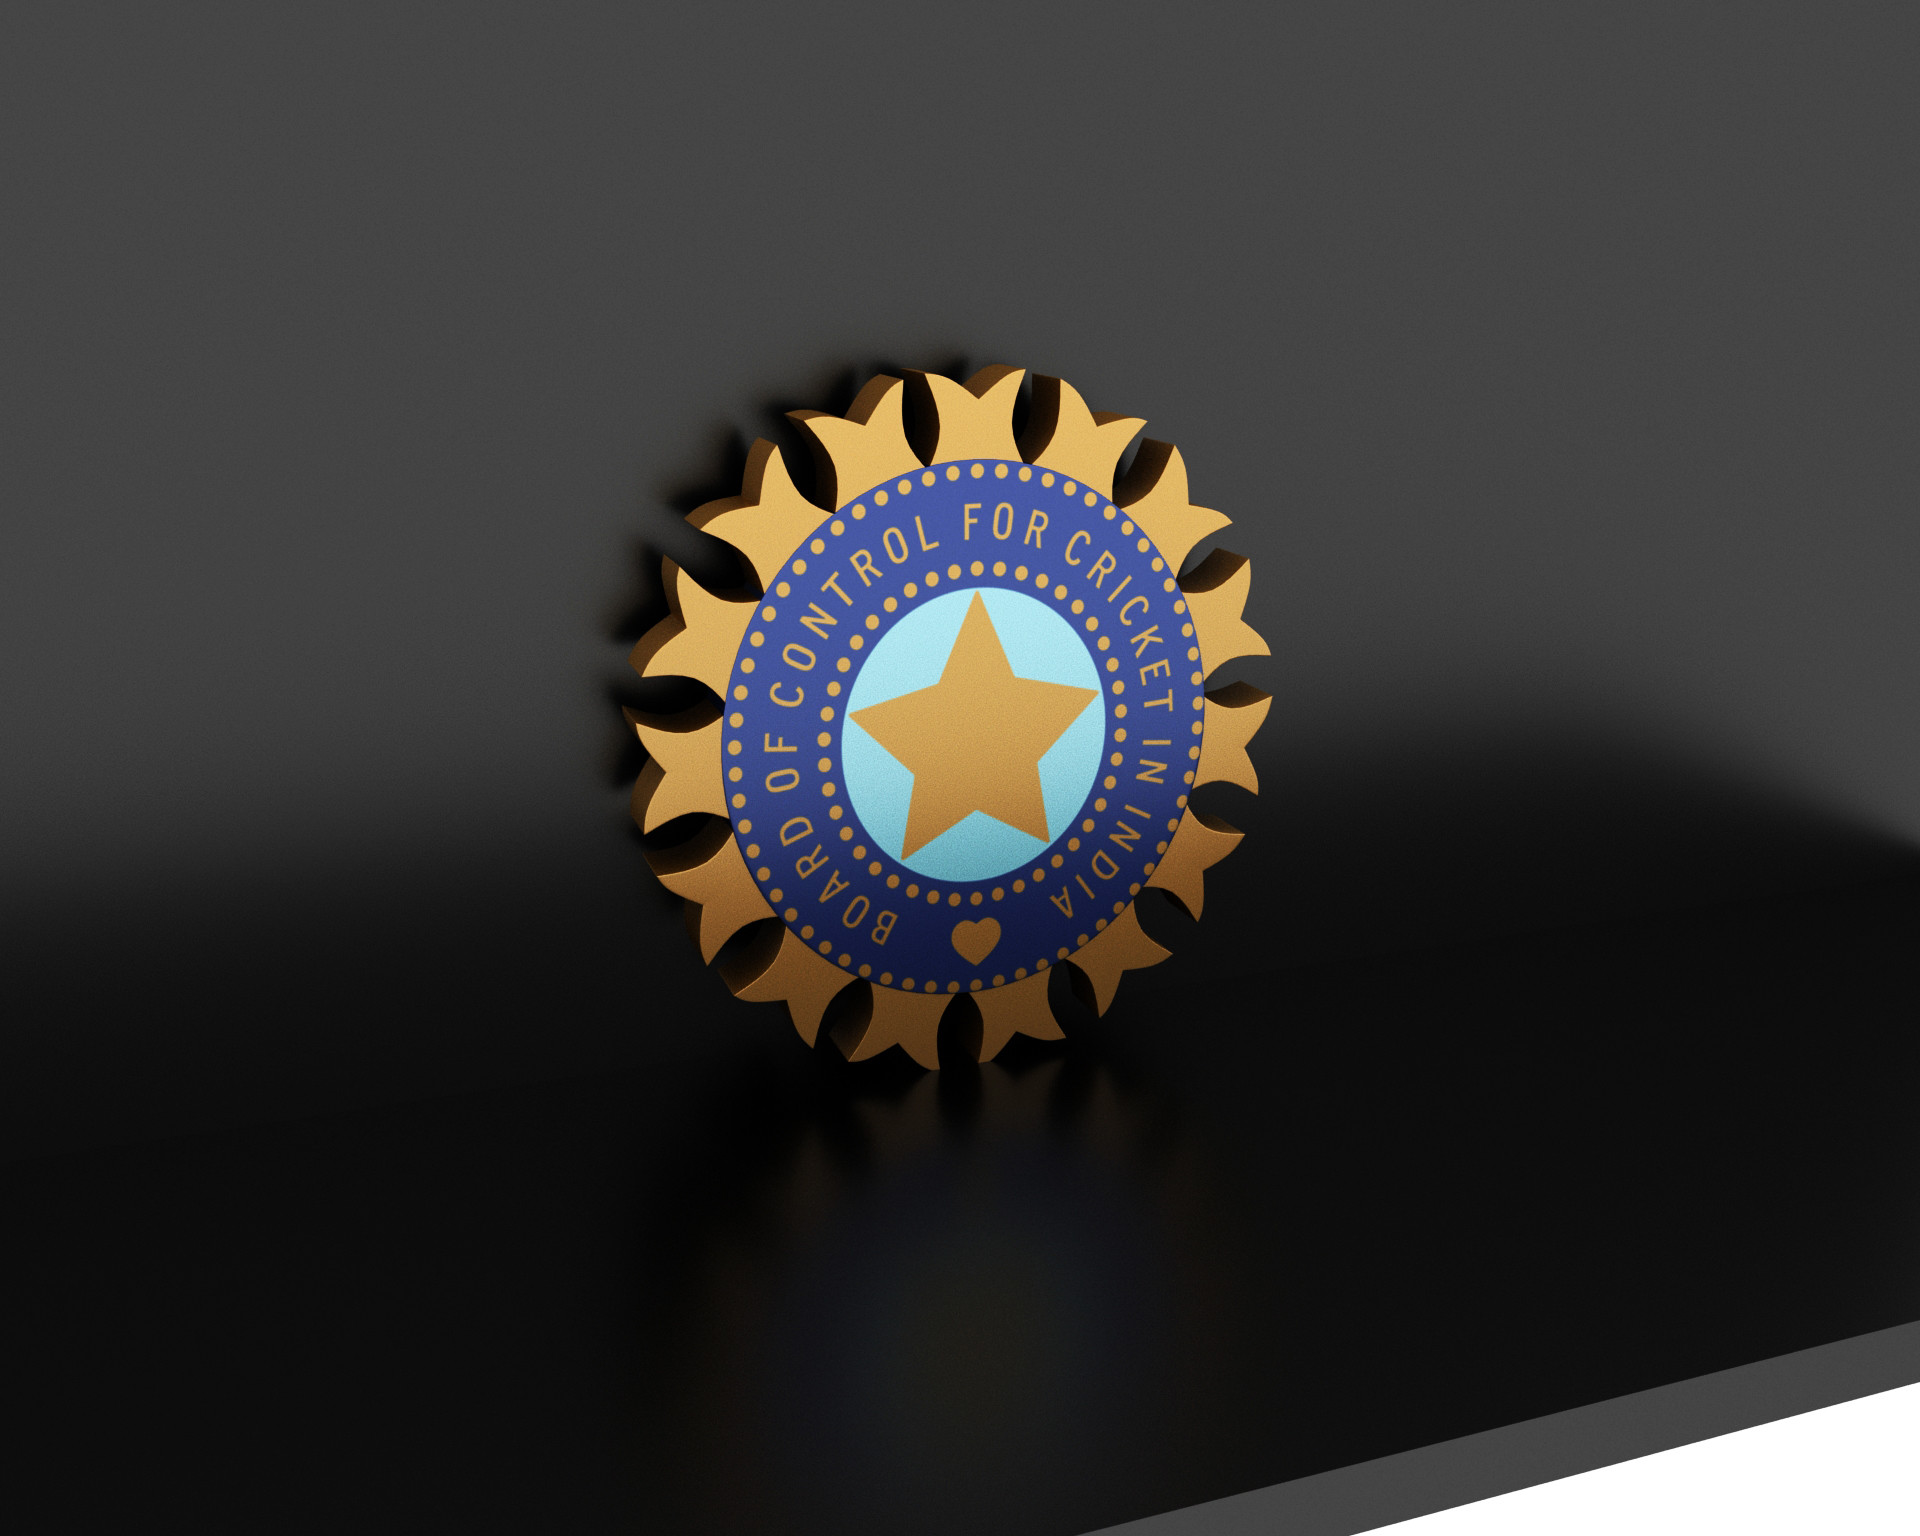 Eight state units barred from attending BCCI AGM